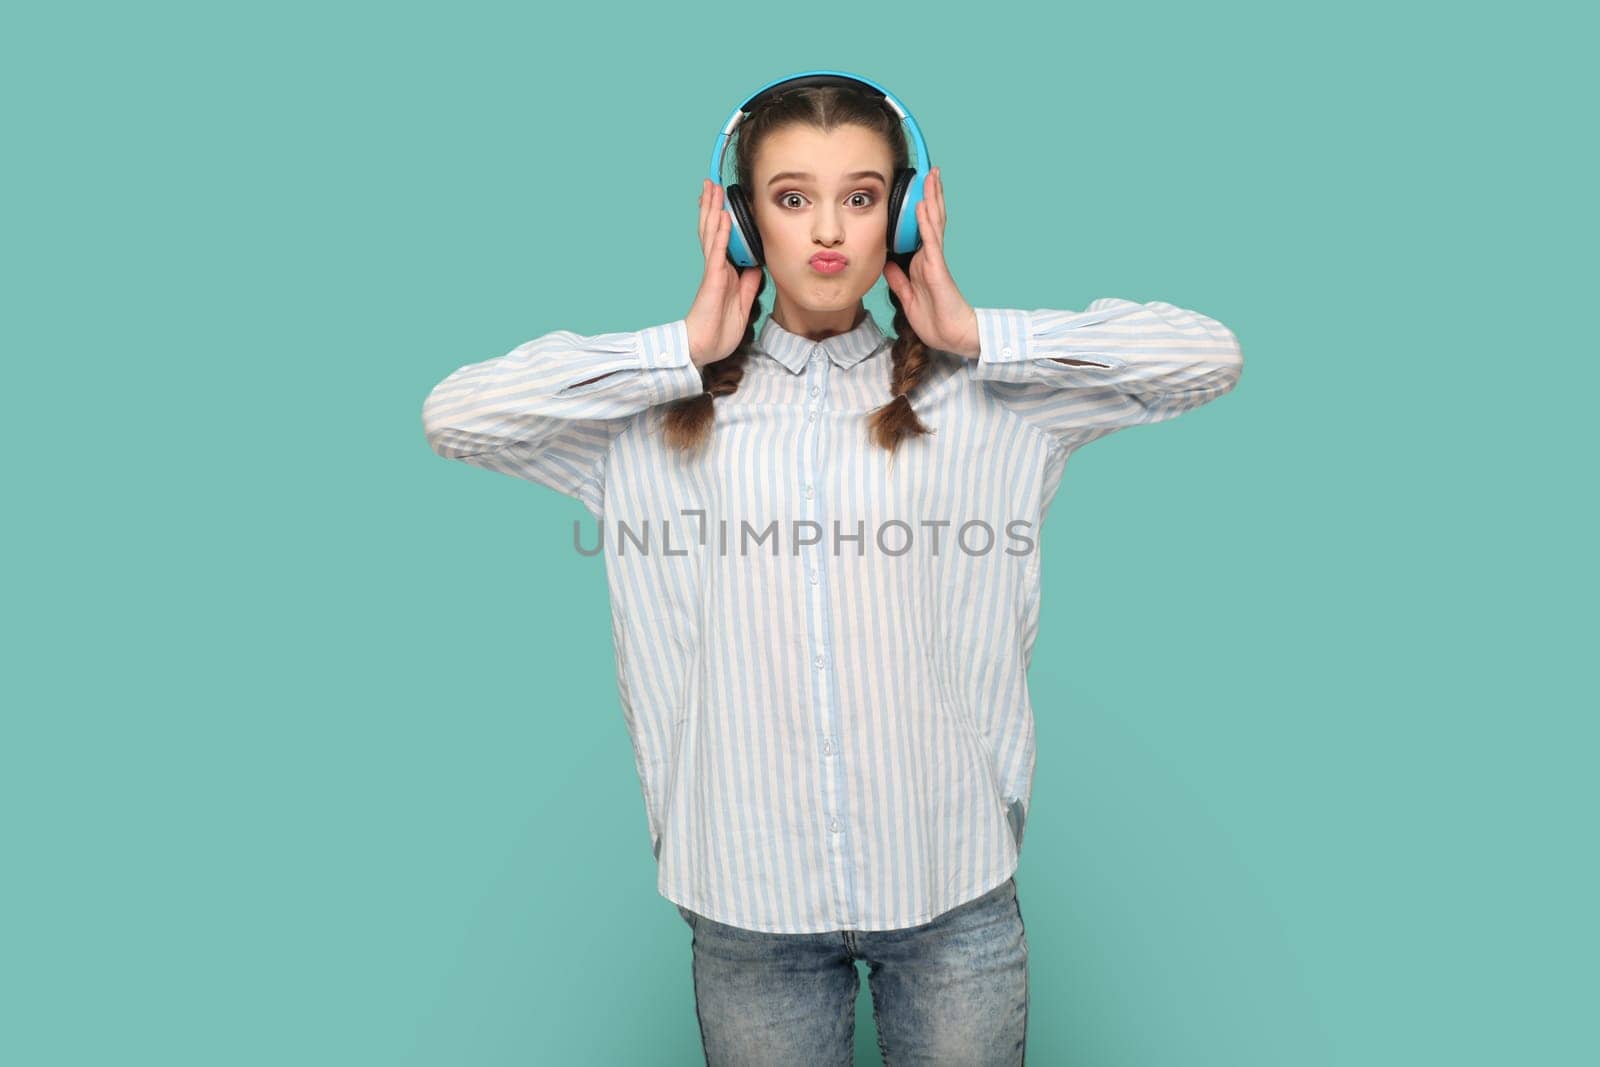 Portrait of funny teenager girl with braids wearing shirt standing looking at camera with pout lips, listening music, holding hands on headphones. Indoor studio shot isolated on green background.